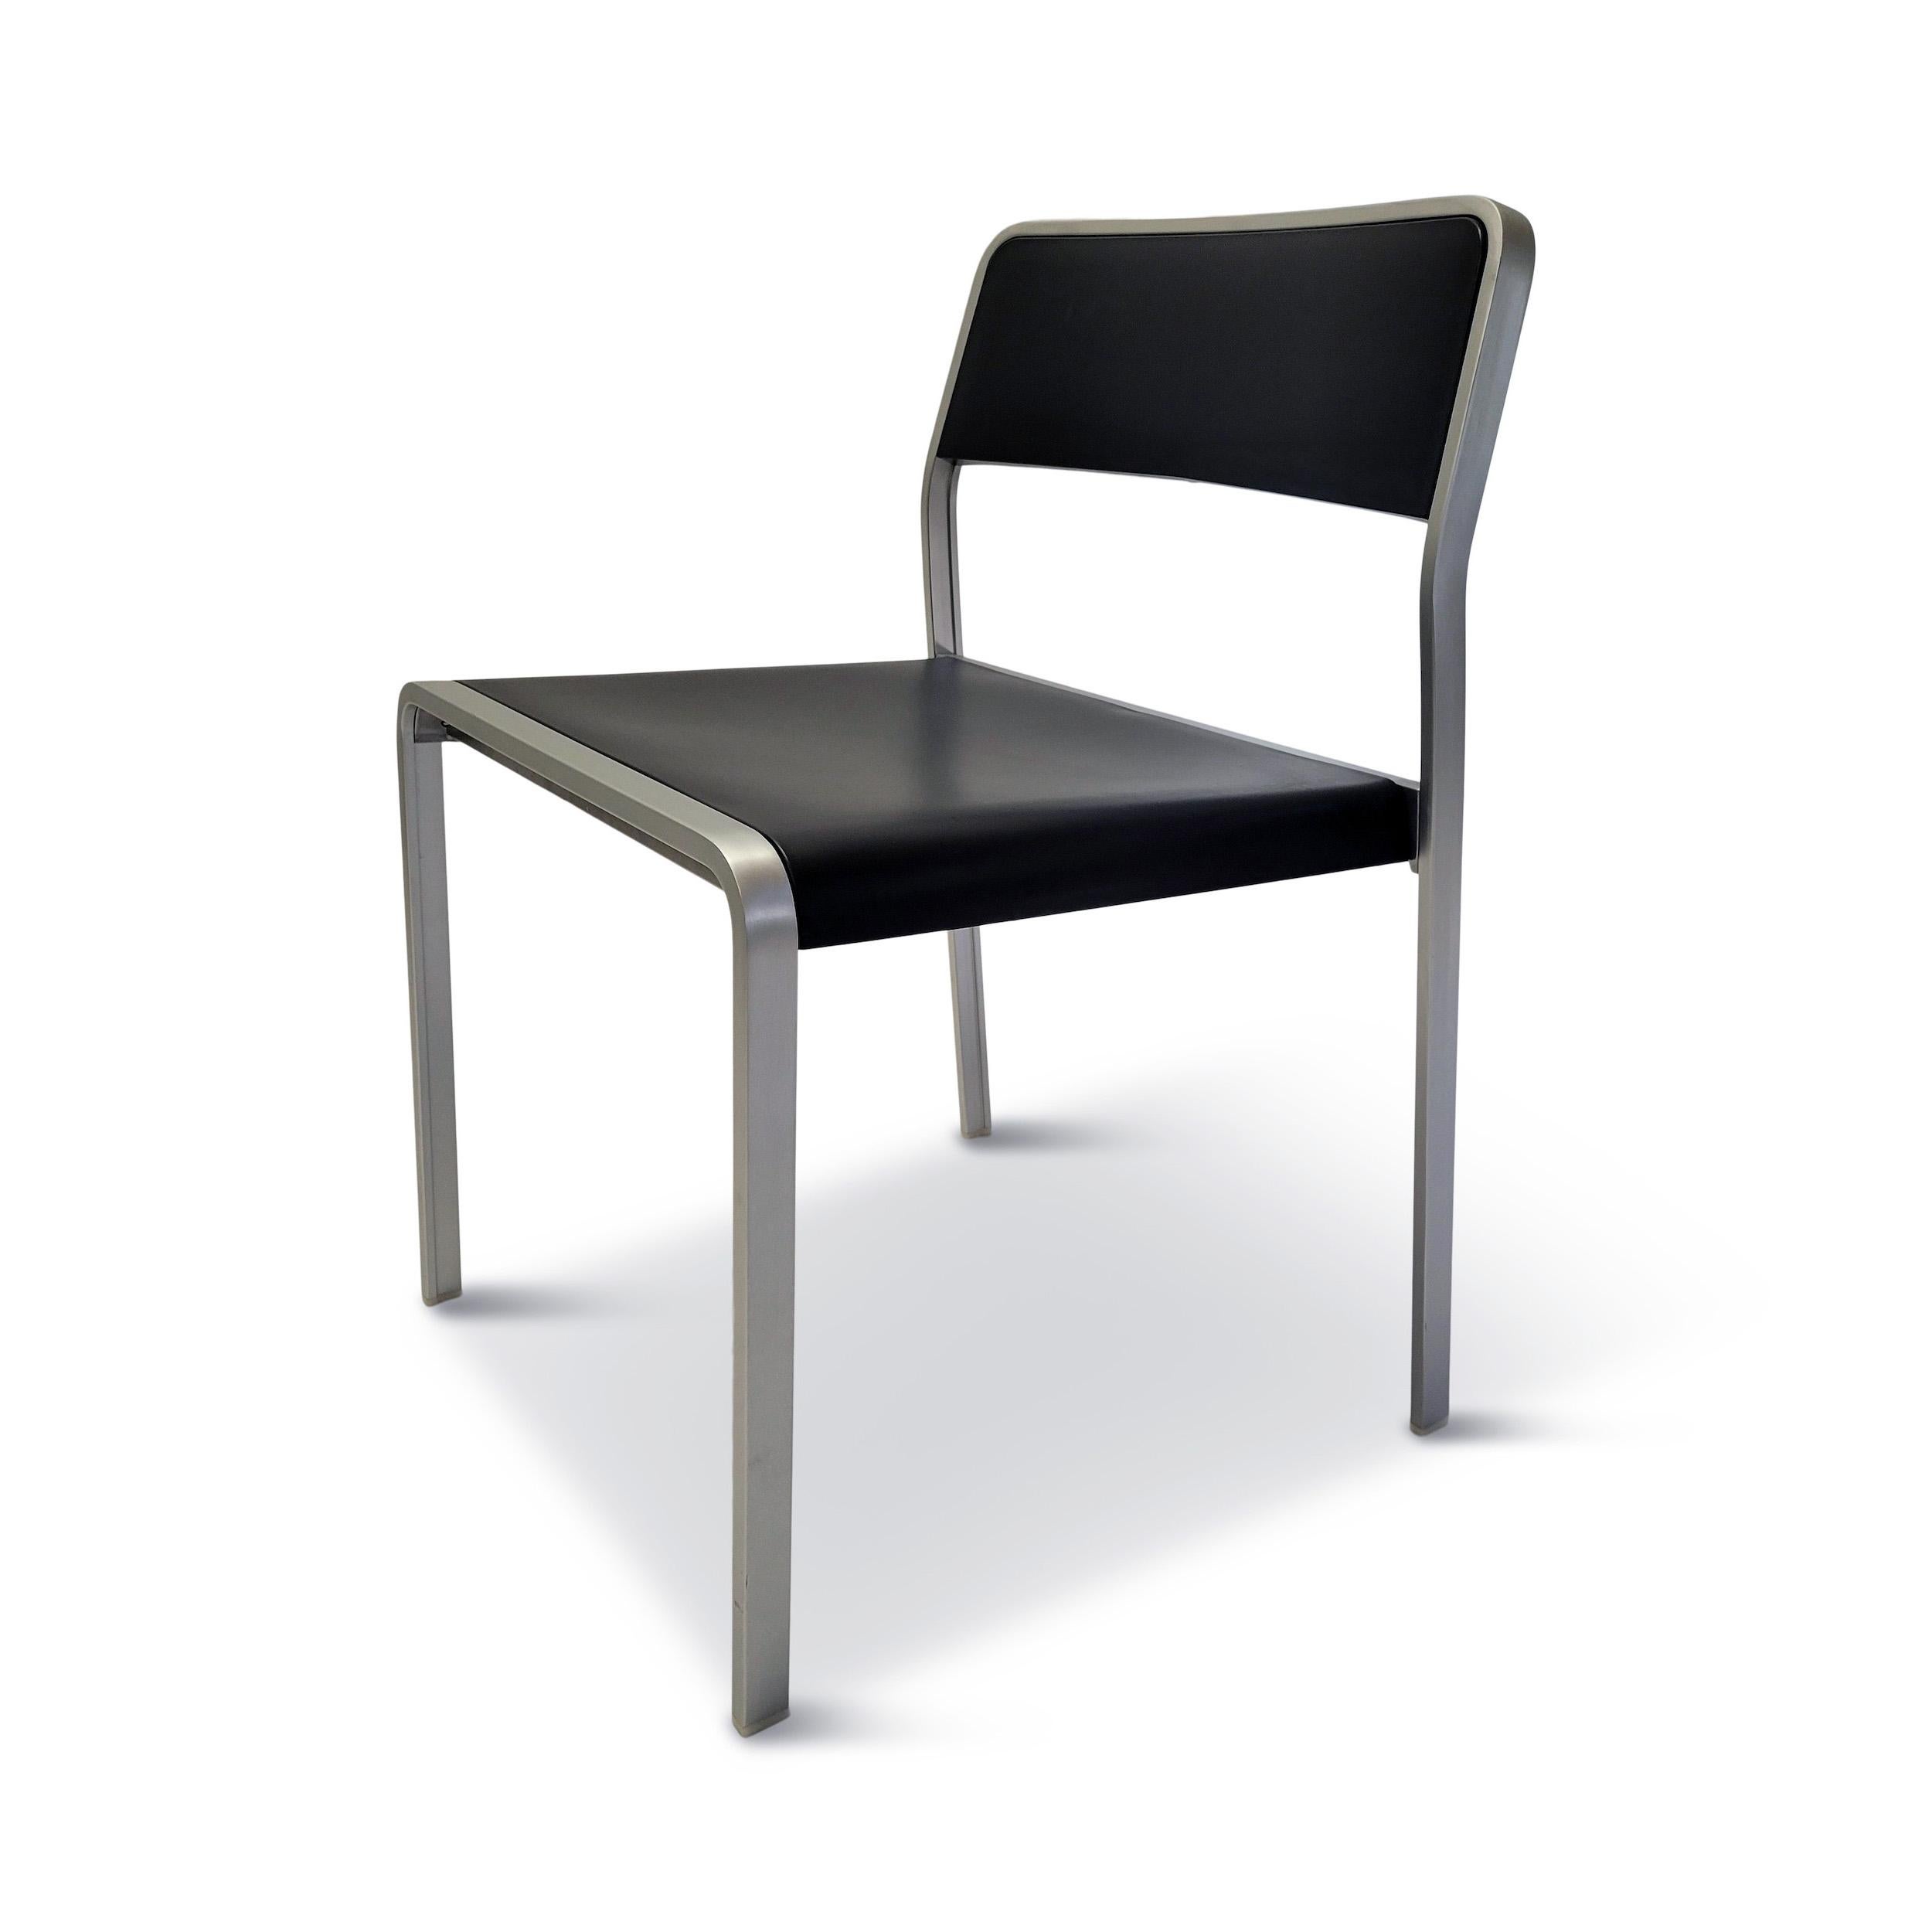 Designed in 2001 and produced by Pallucco in 2002, the Bridge is a Carlo Tamborini-designed stackable chair with a metal frame and plastic seat and back. The Bridge chair is very similar to Tamborini's later collaboration with Piero LIssoni that